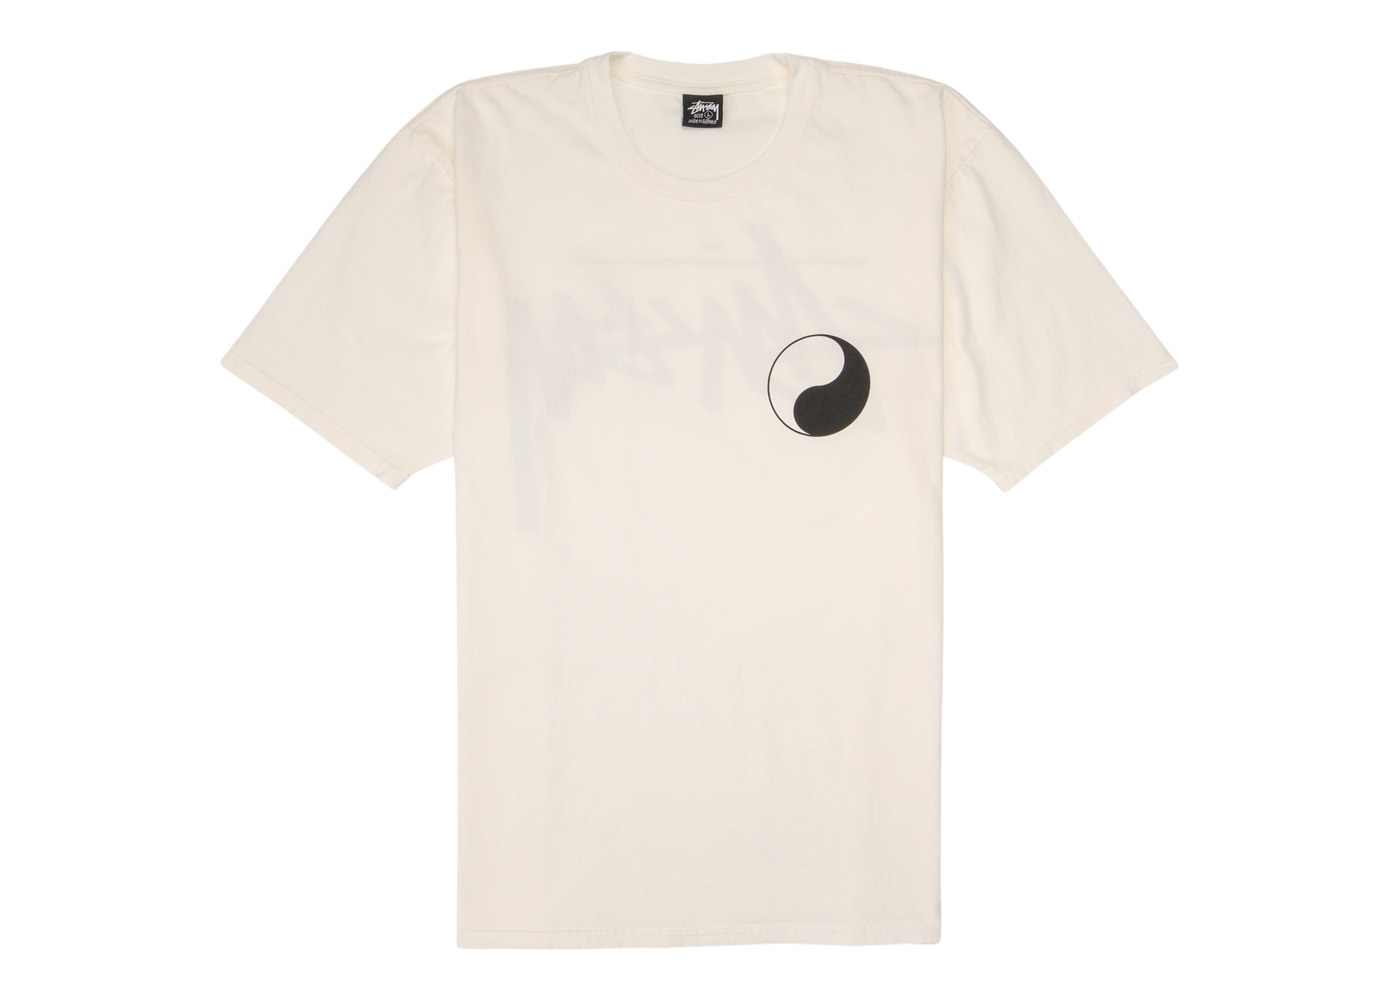 Stussy x Our Legacy Work Shop Yin Yang Pigment Dyed Tee